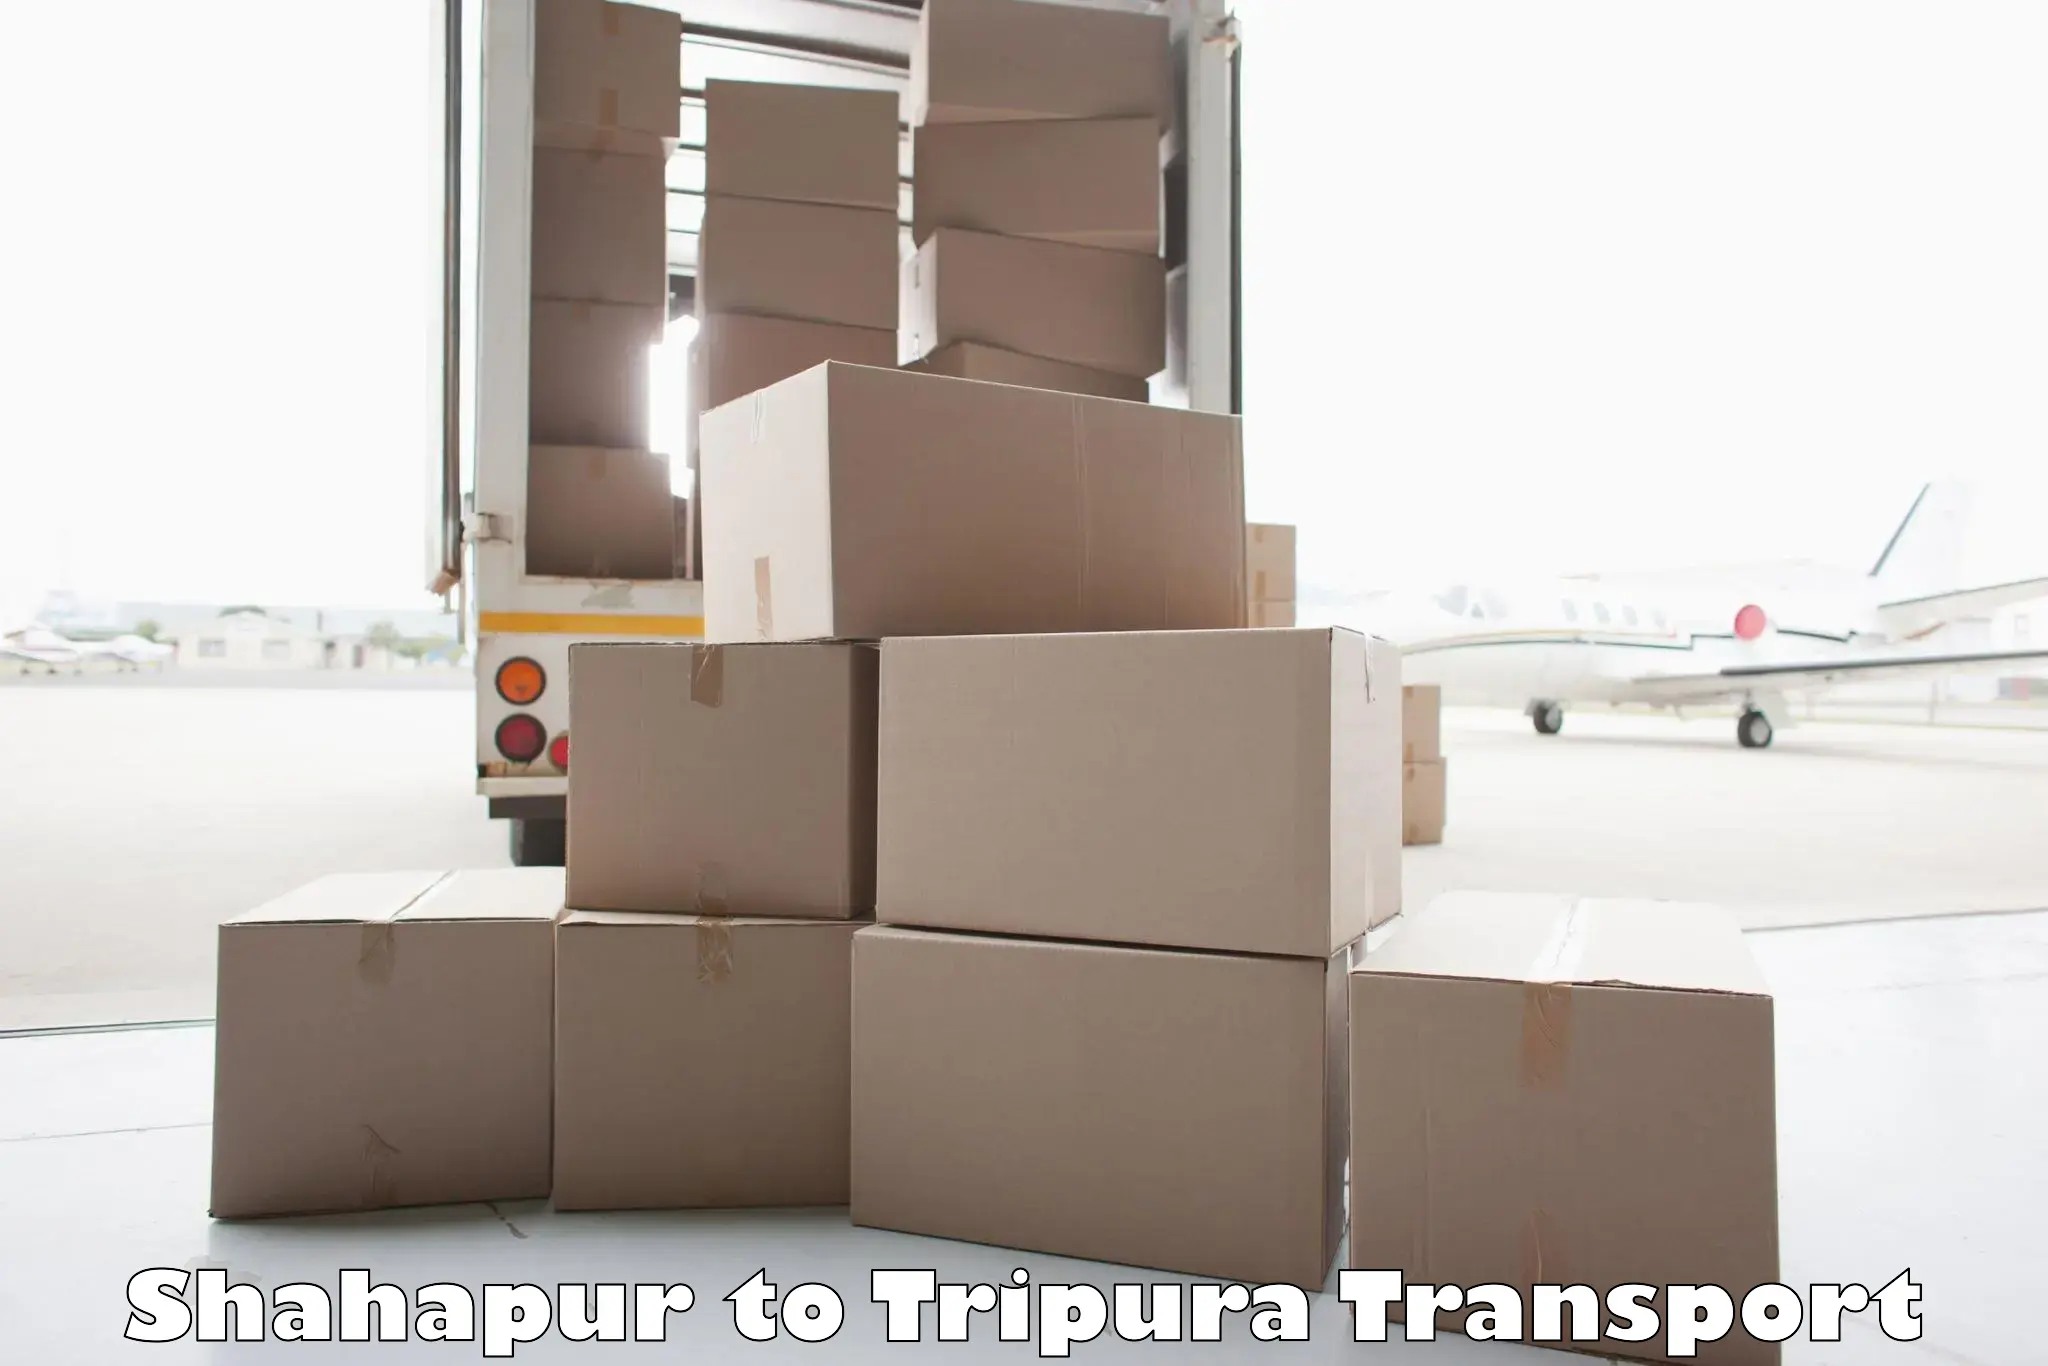 Delivery service Shahapur to Tripura